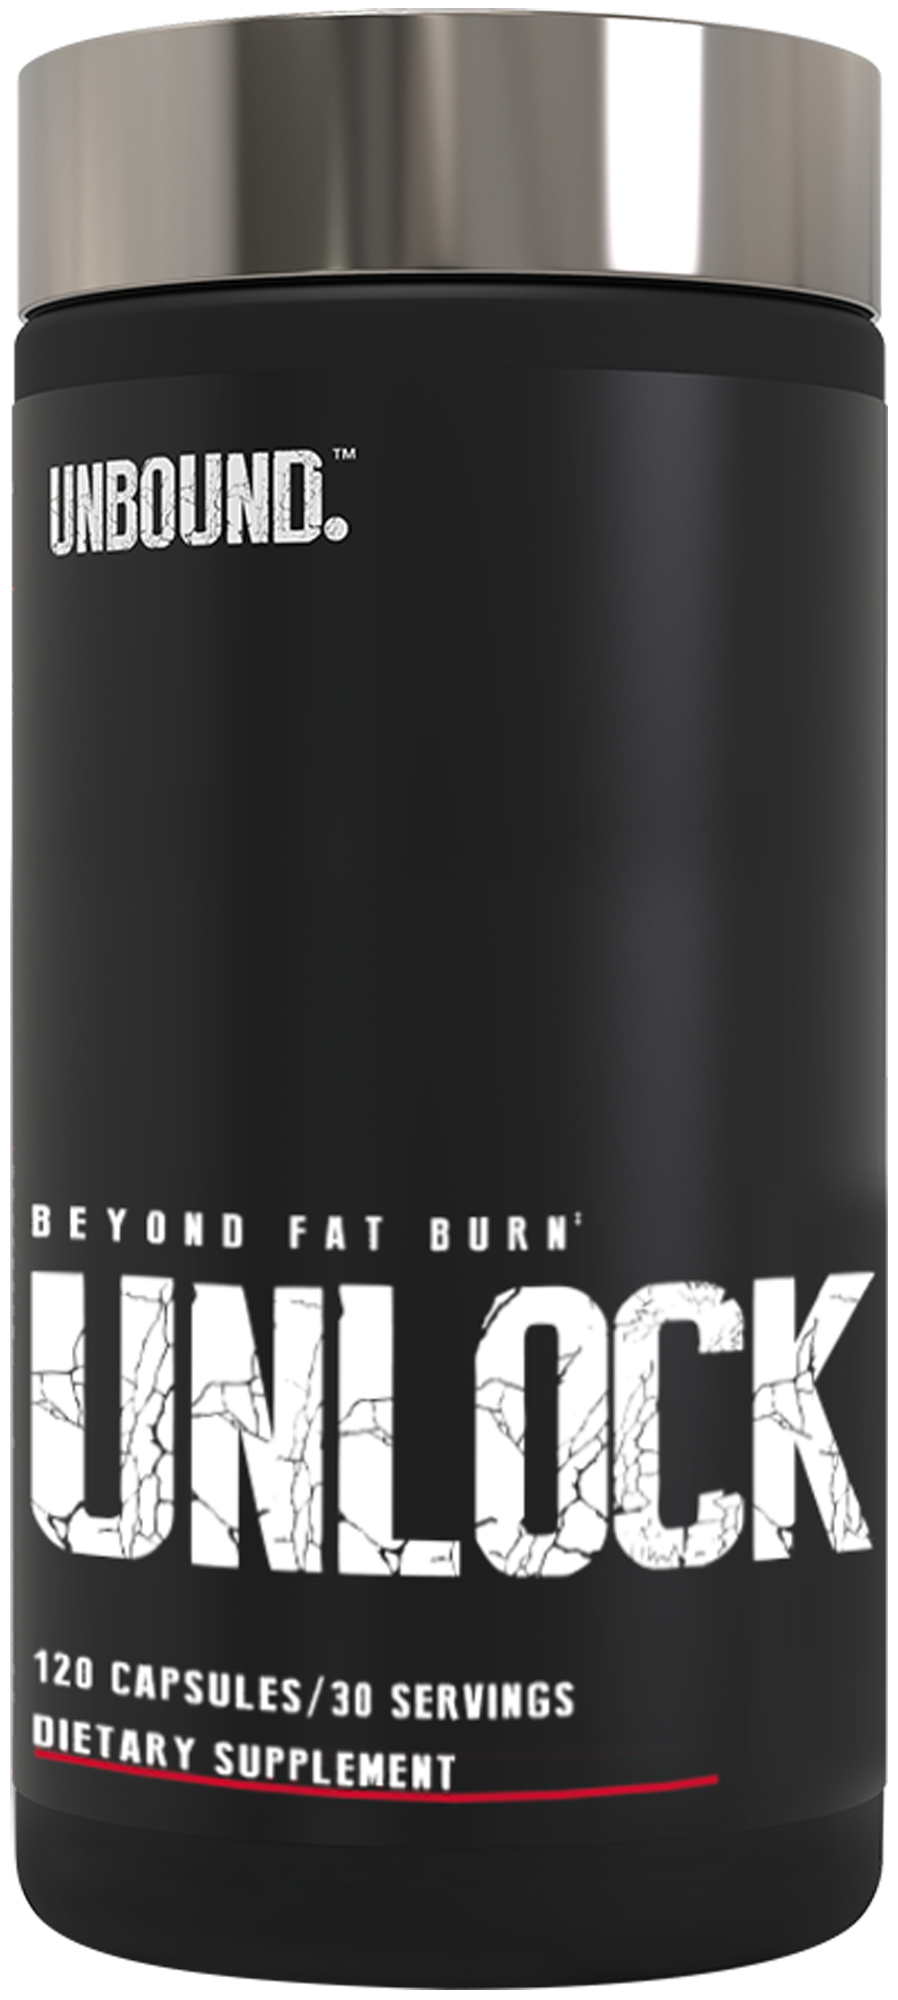 Unlock your thermogenic potential